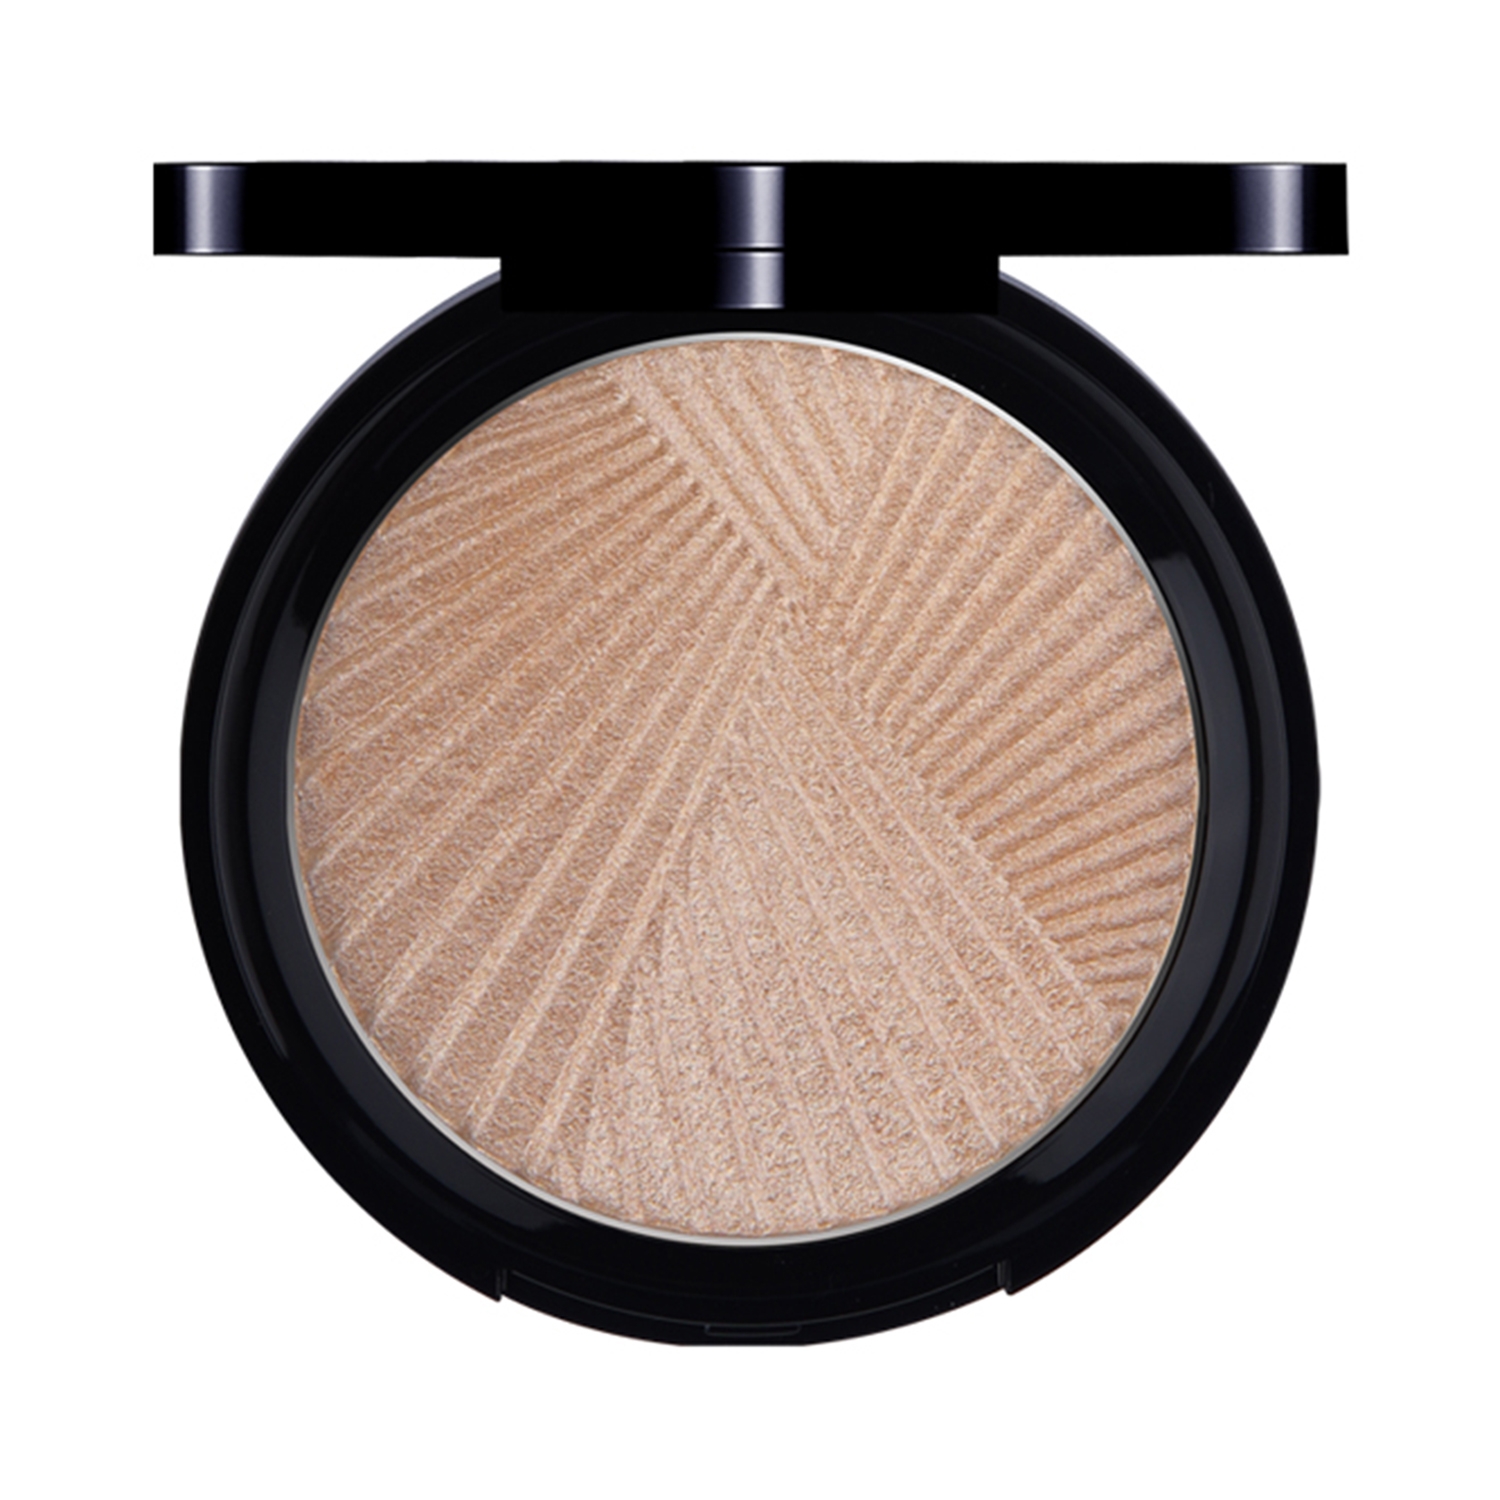 Daily Life Forever52 | Daily Life Forever52 Sunkissed Illuminator/ Highlighter ILU003 (8gm)